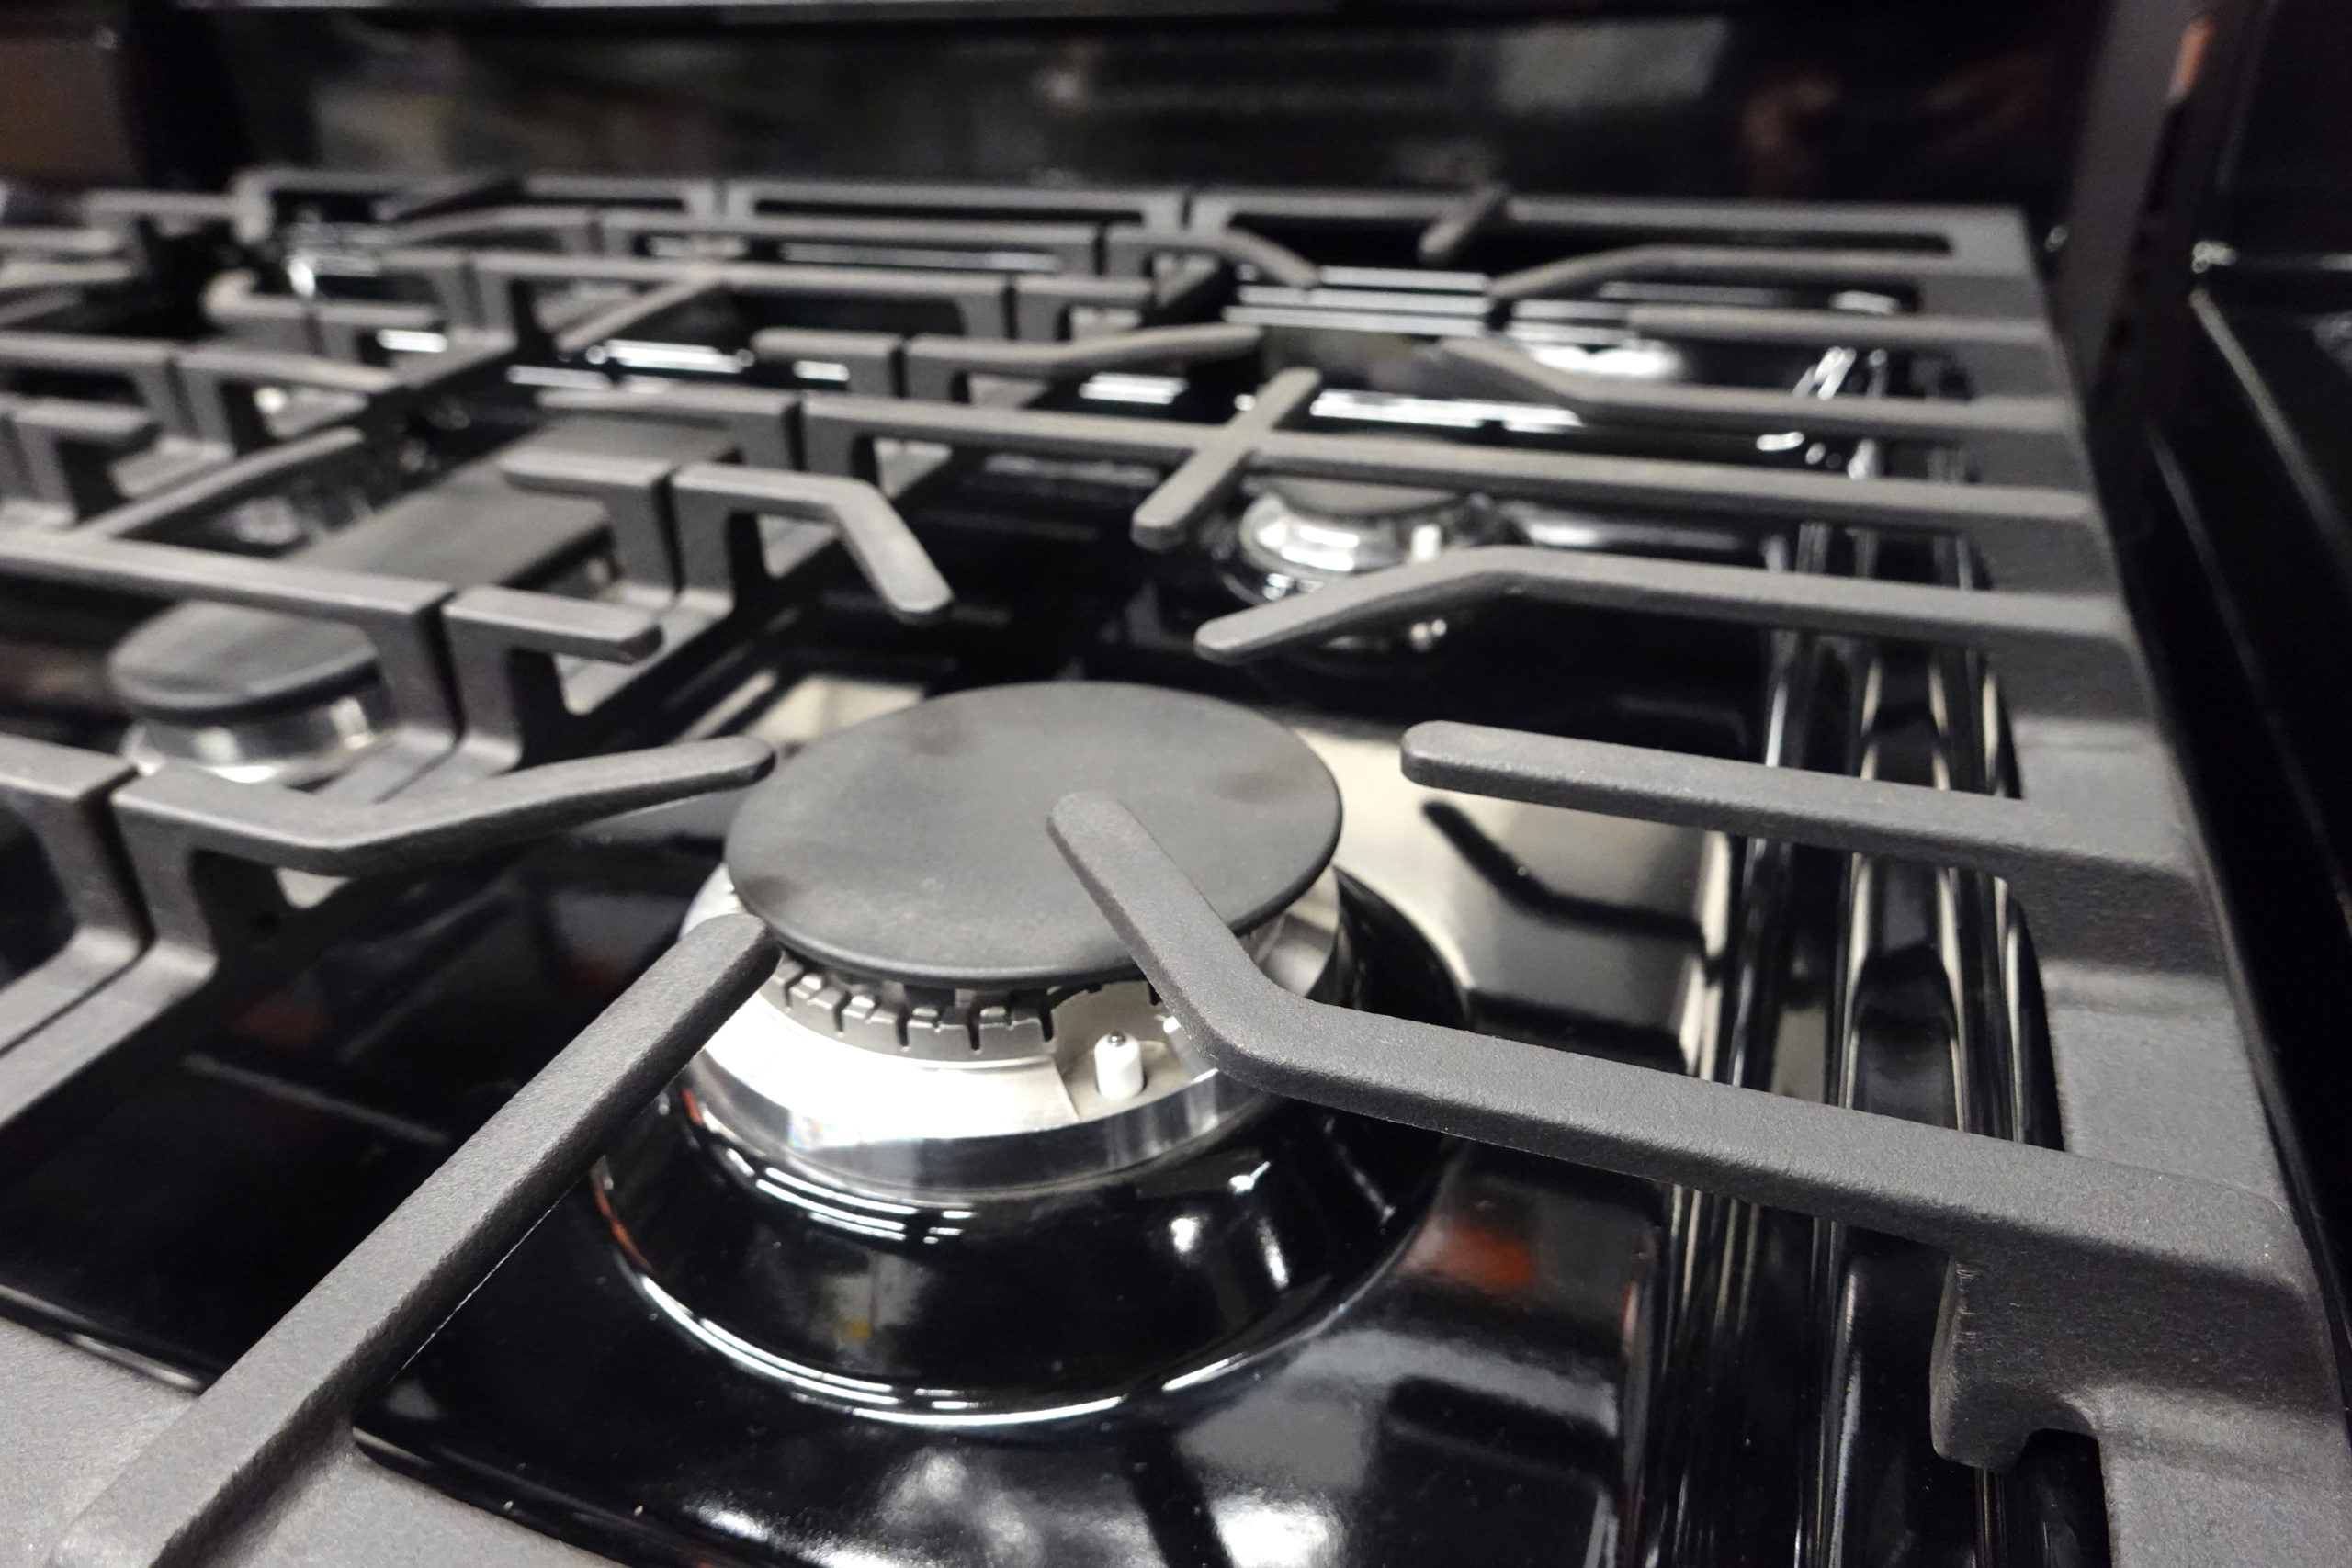 Consumer Product Safety Commissioner Sparks Debate On Gas Ranges After Comments Regarding Regulation On Future Products